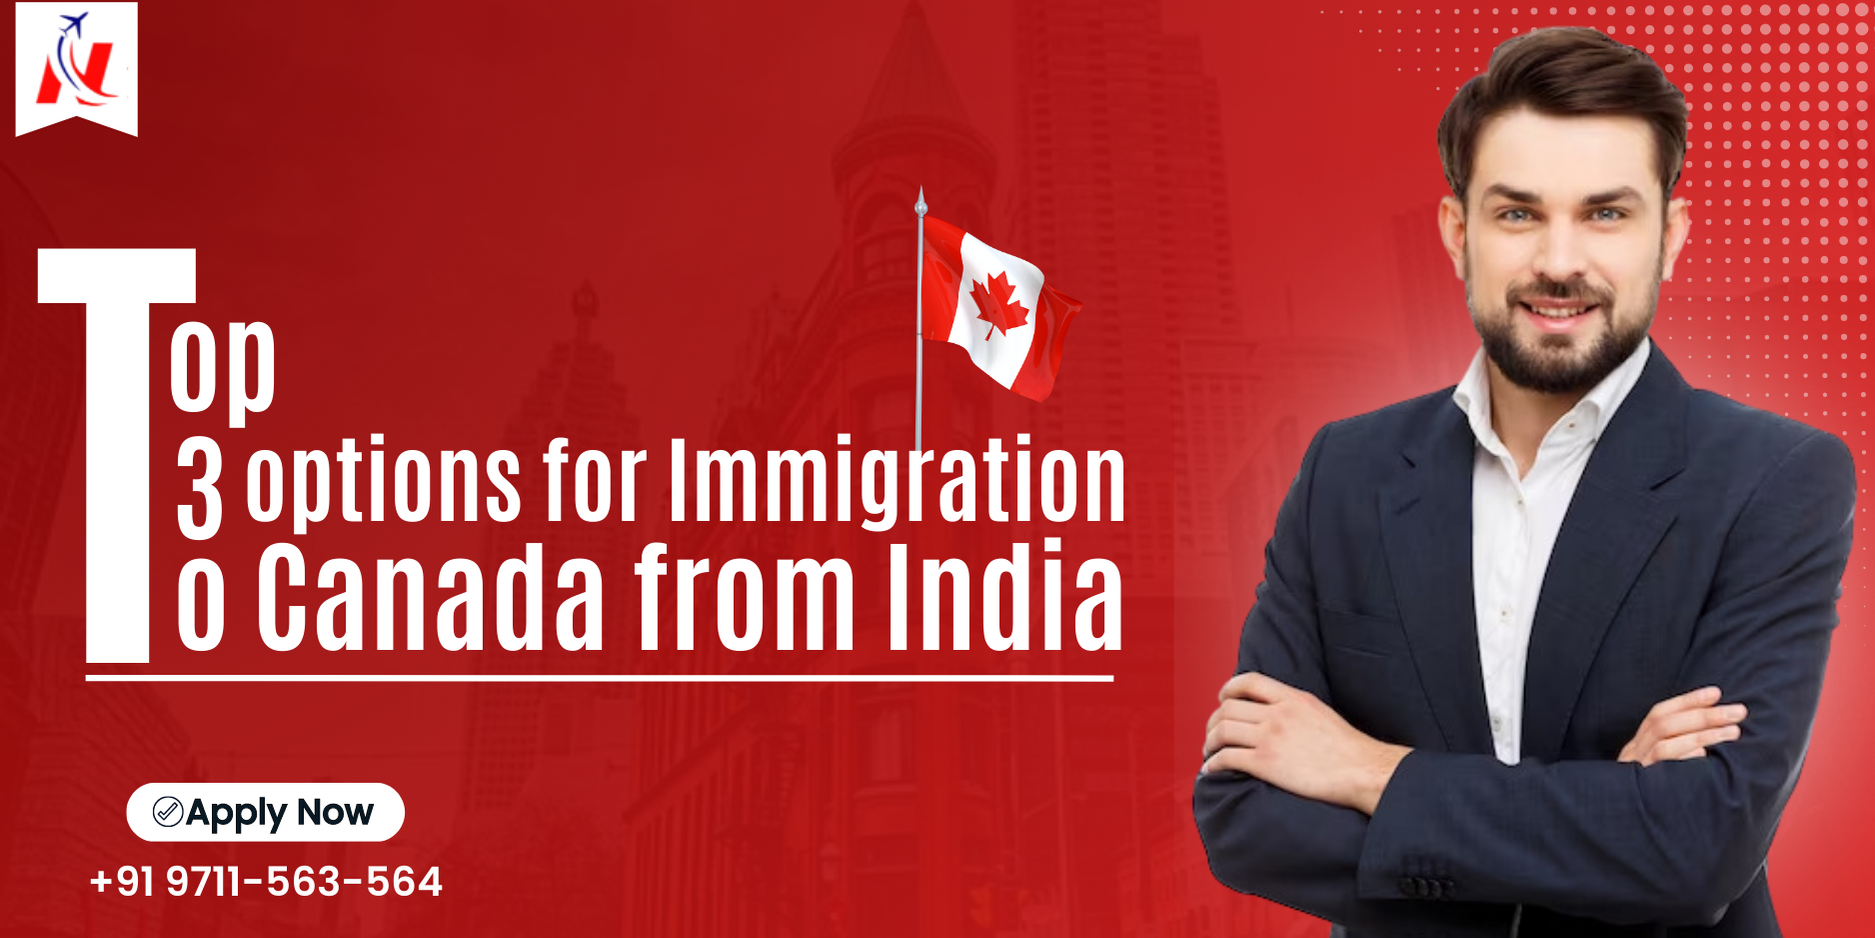 Top 3 options for Immigration to Canada from India